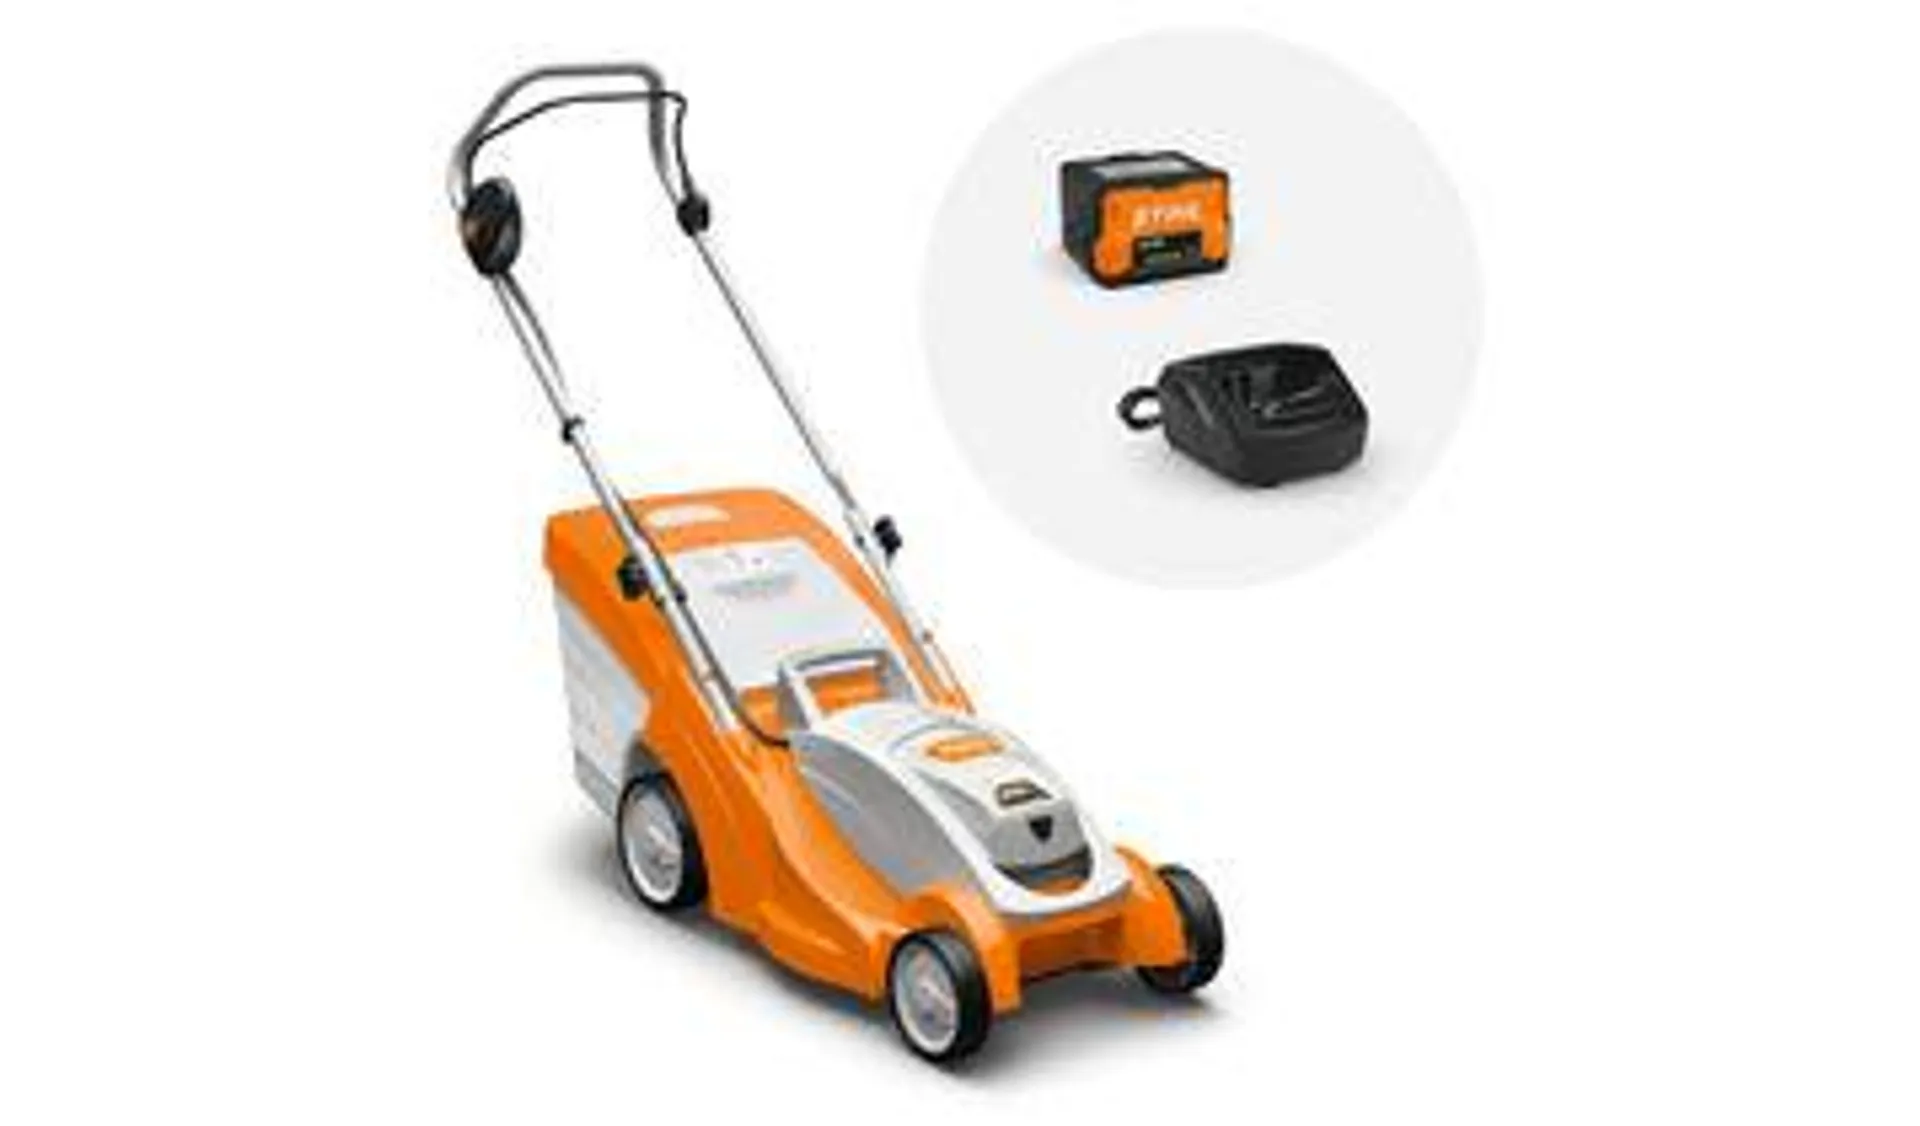 STIHL RMA 339 AK Battery Lawnmower Kit (With Battery & Charger)